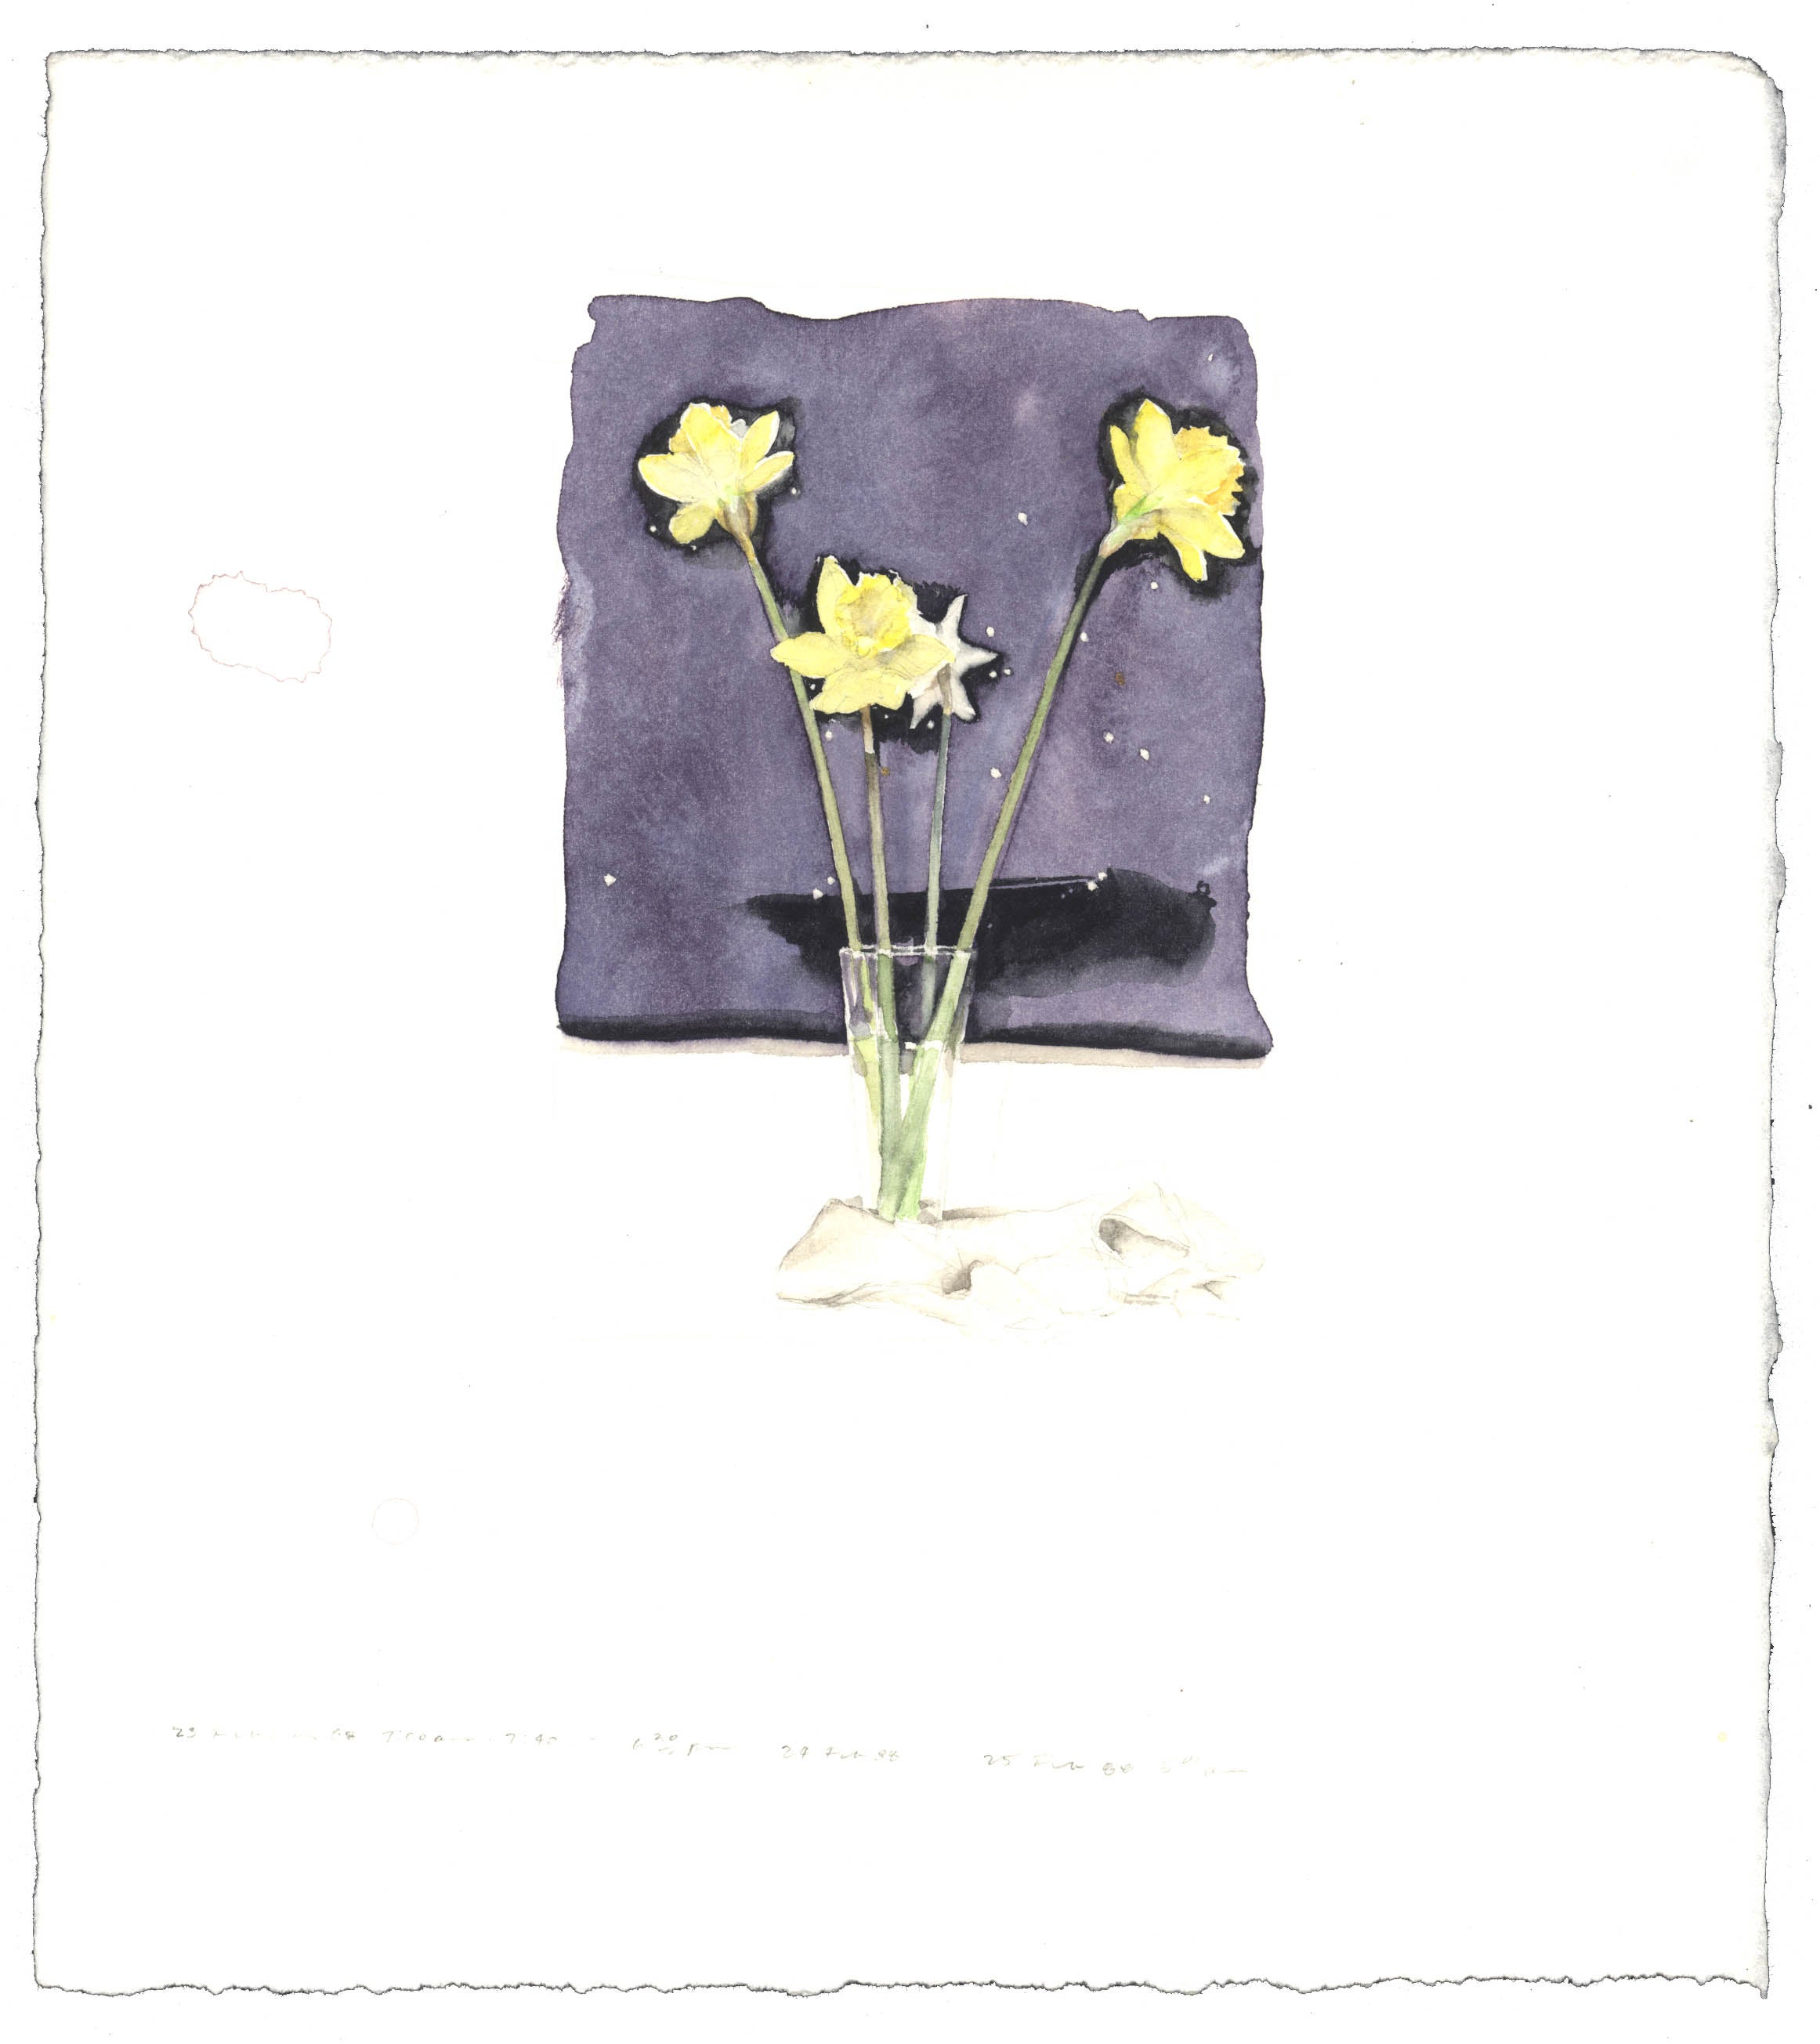 Daffodils with Star Map image